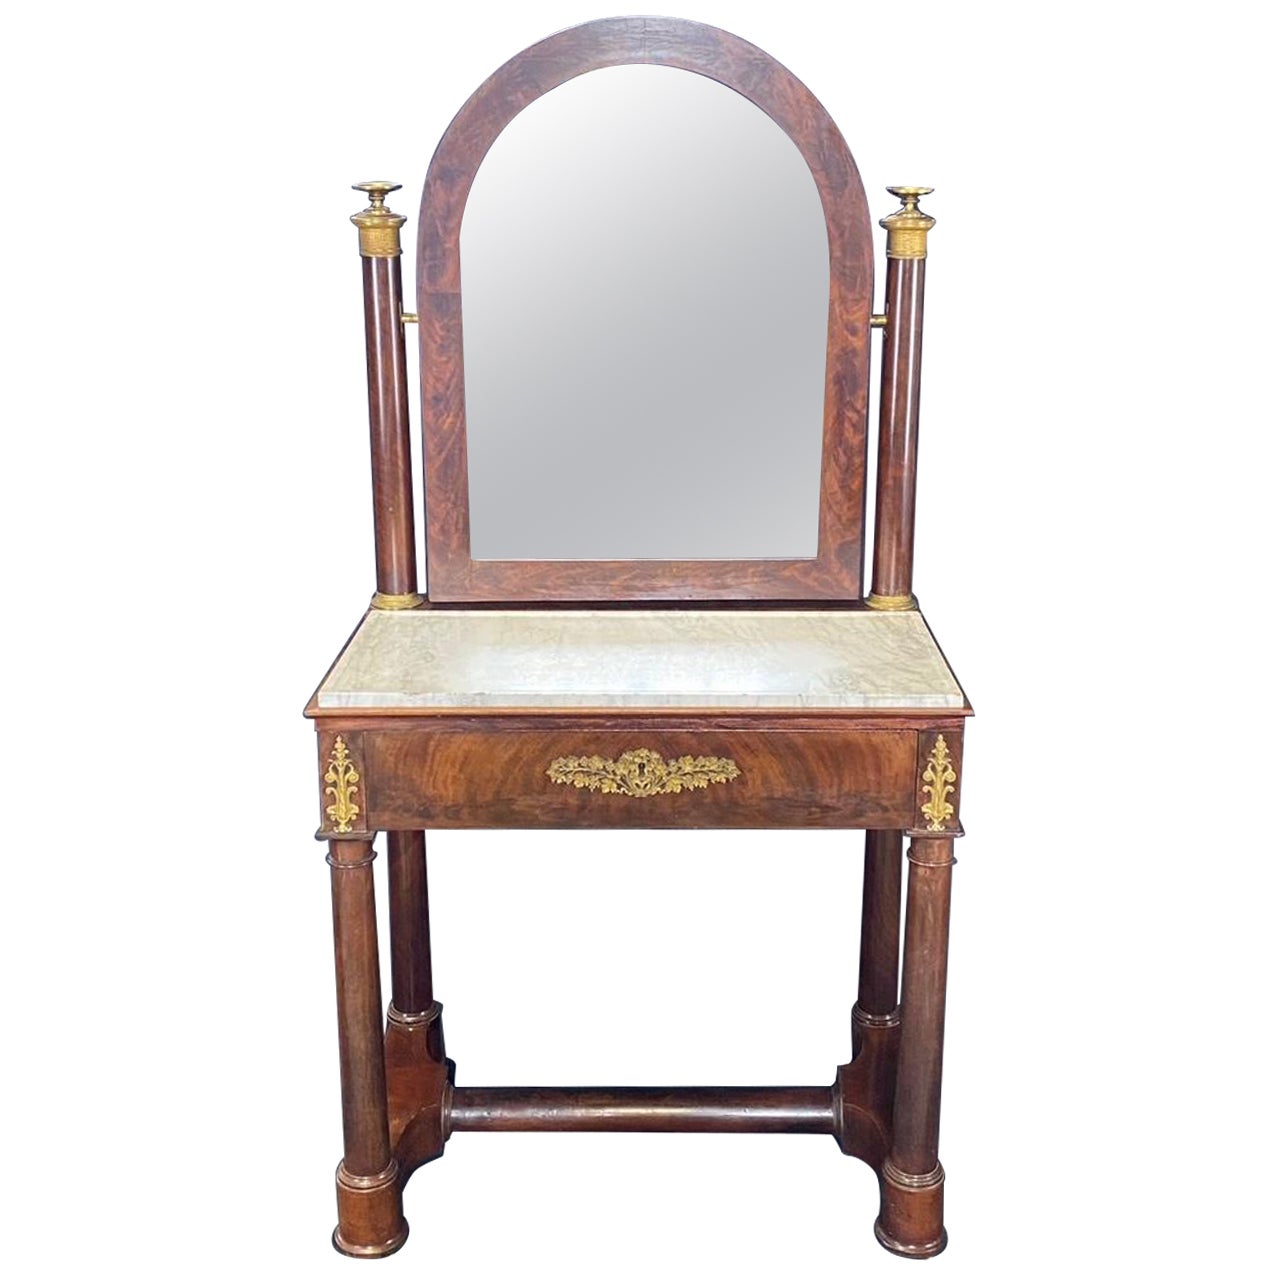 Elegant French 19th Century Empire Vanity with Original Marble Top For Sale